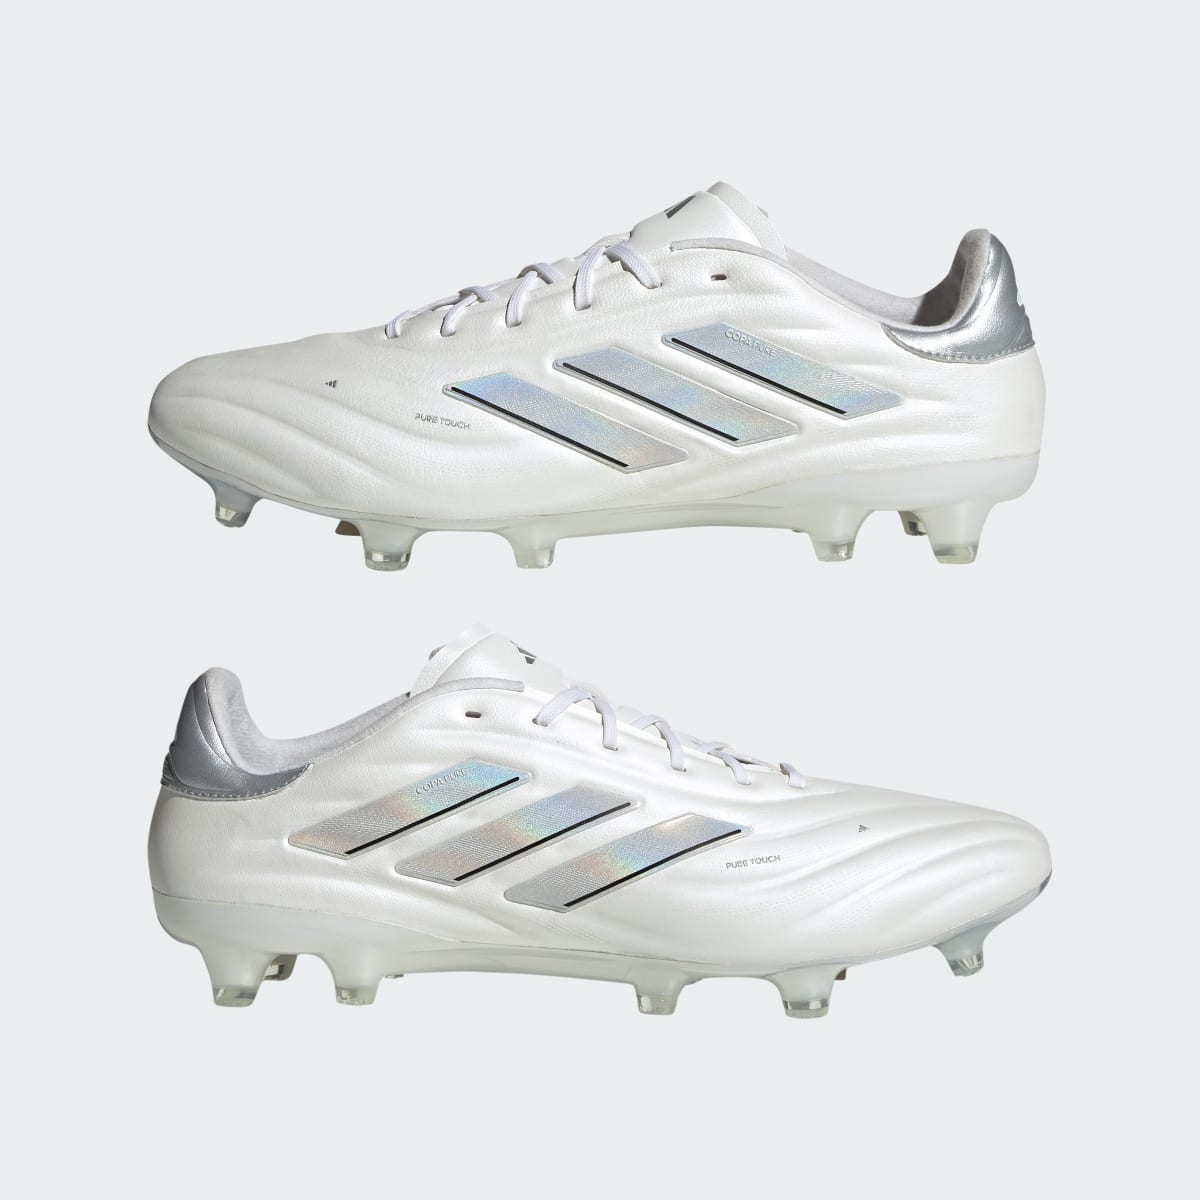 Adidas Copa Pure II Elite Firm Ground Boots. 8